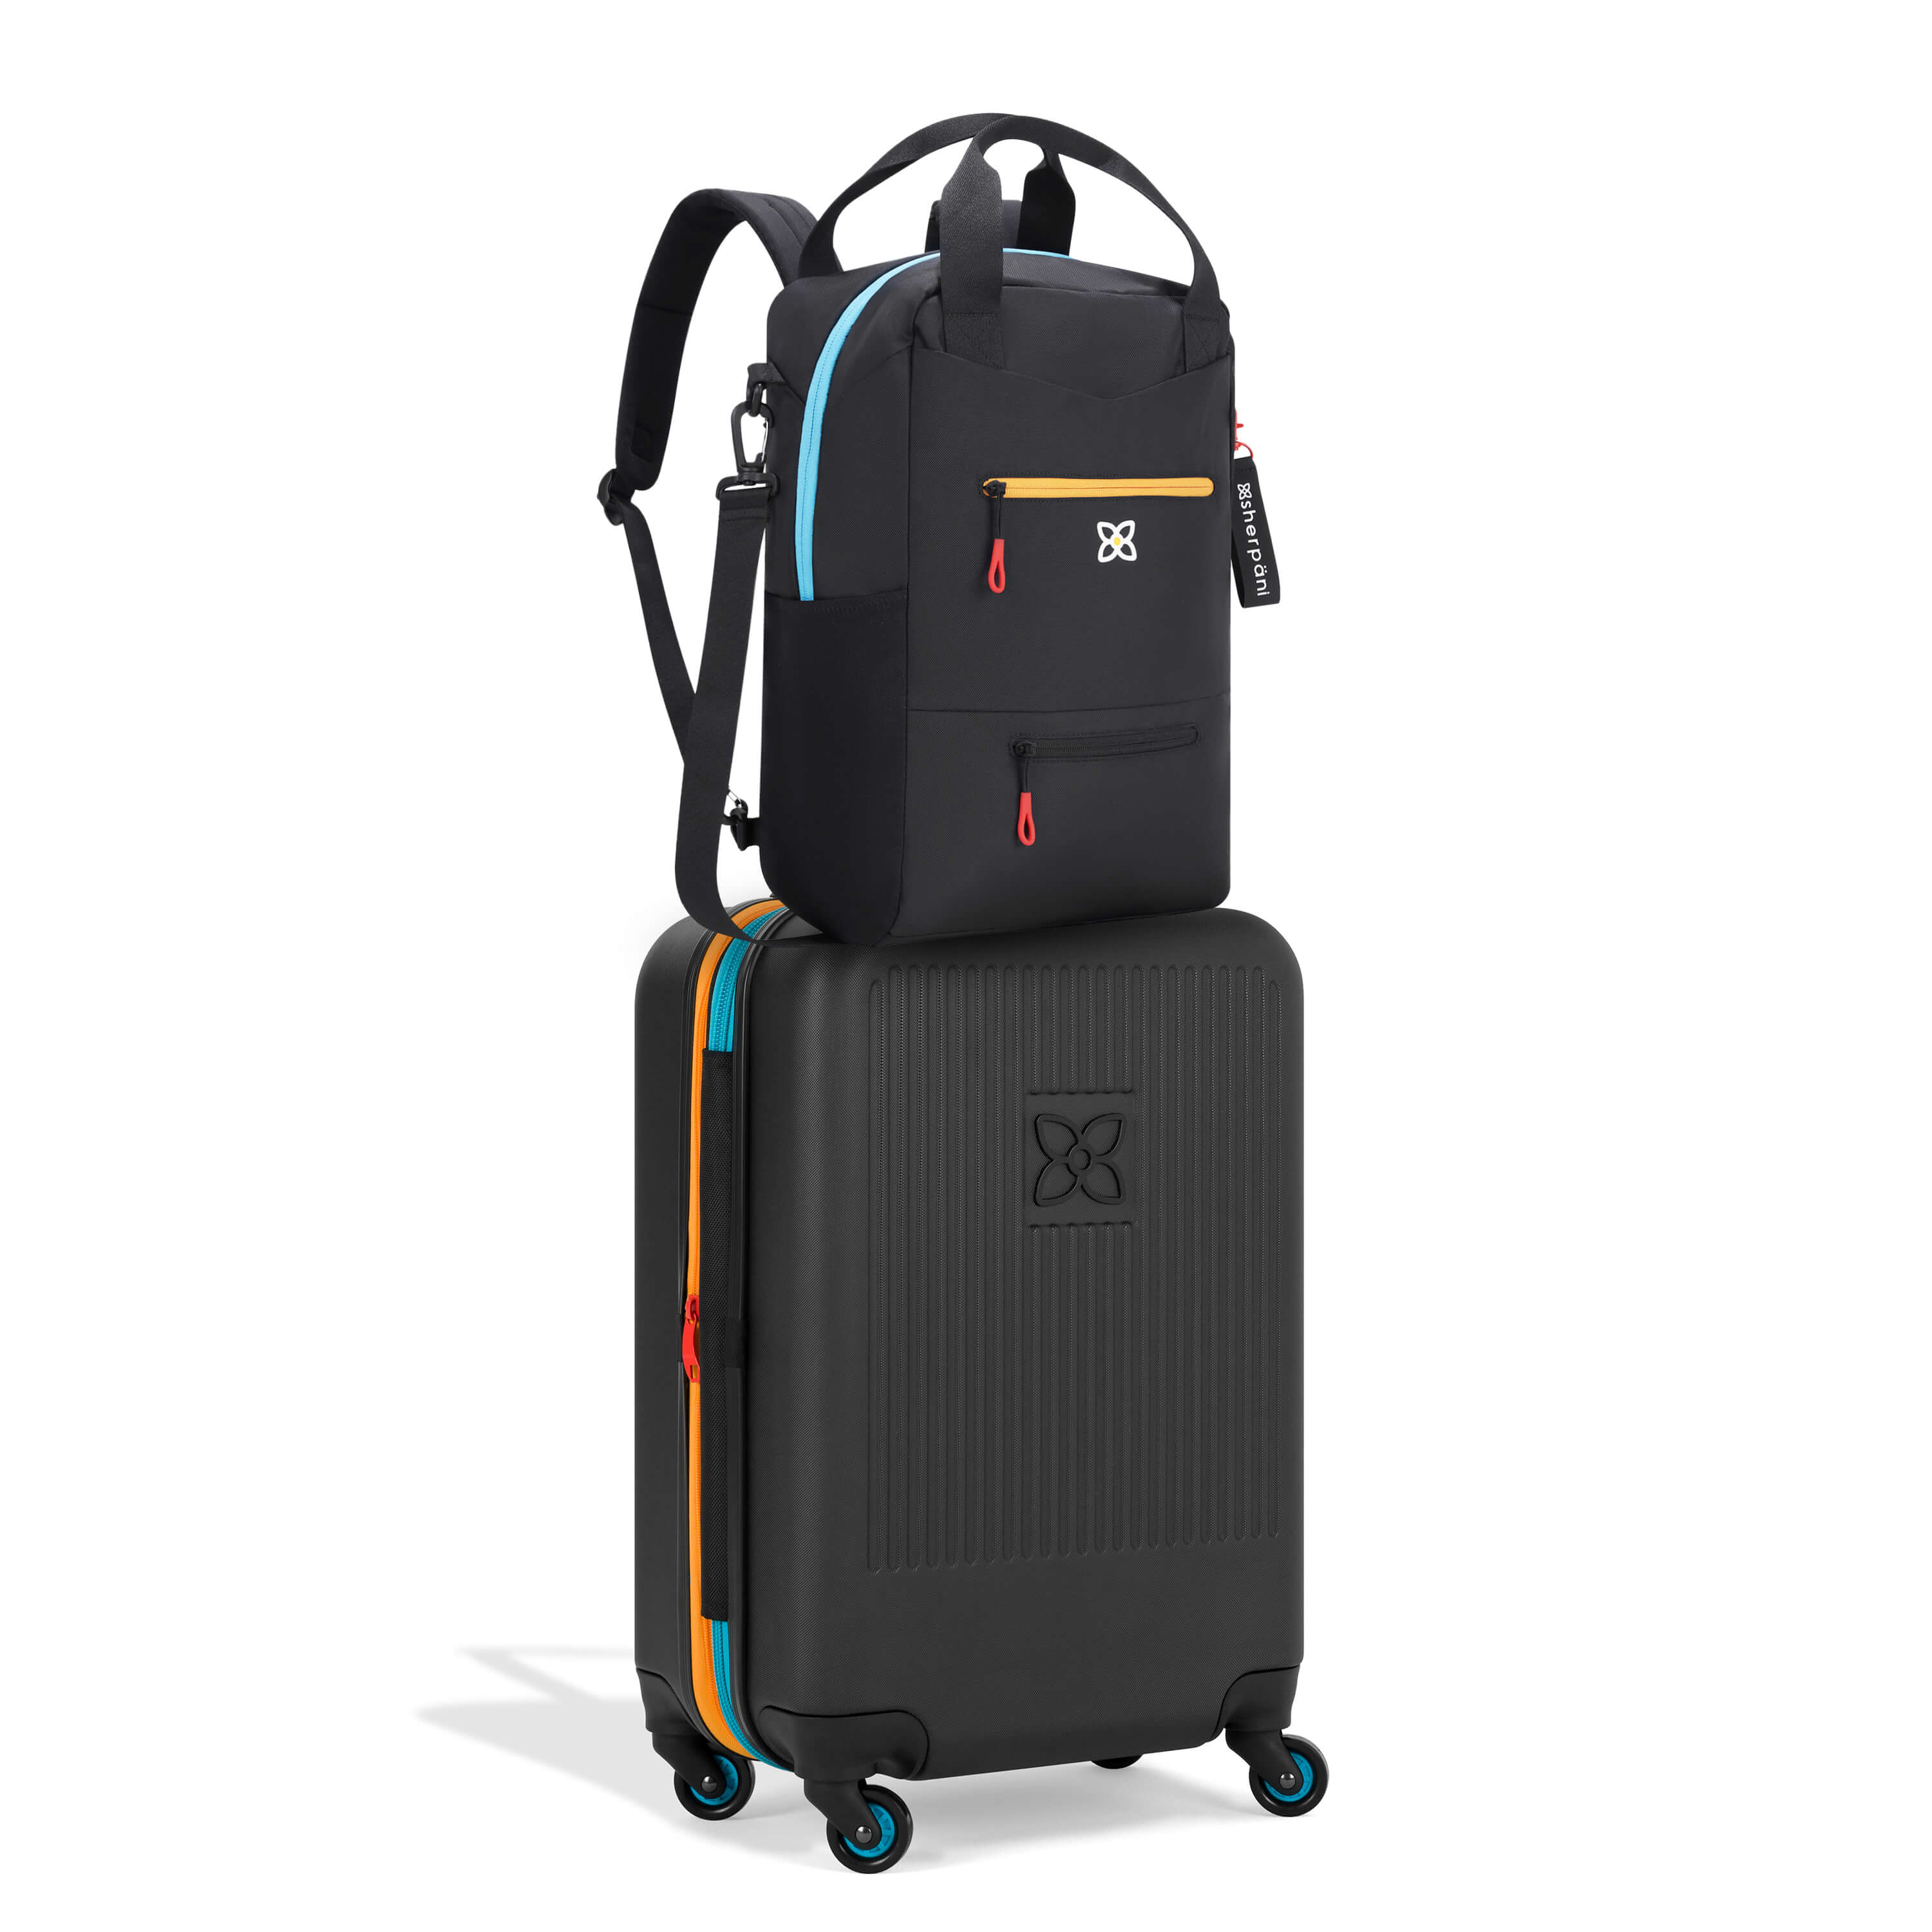 Sherpani Travel Carry on Bundle in Cool Chromatic. Hard shell luggage the Meridian and convertible travel bag the Camden bundled together at a discounted rate. 